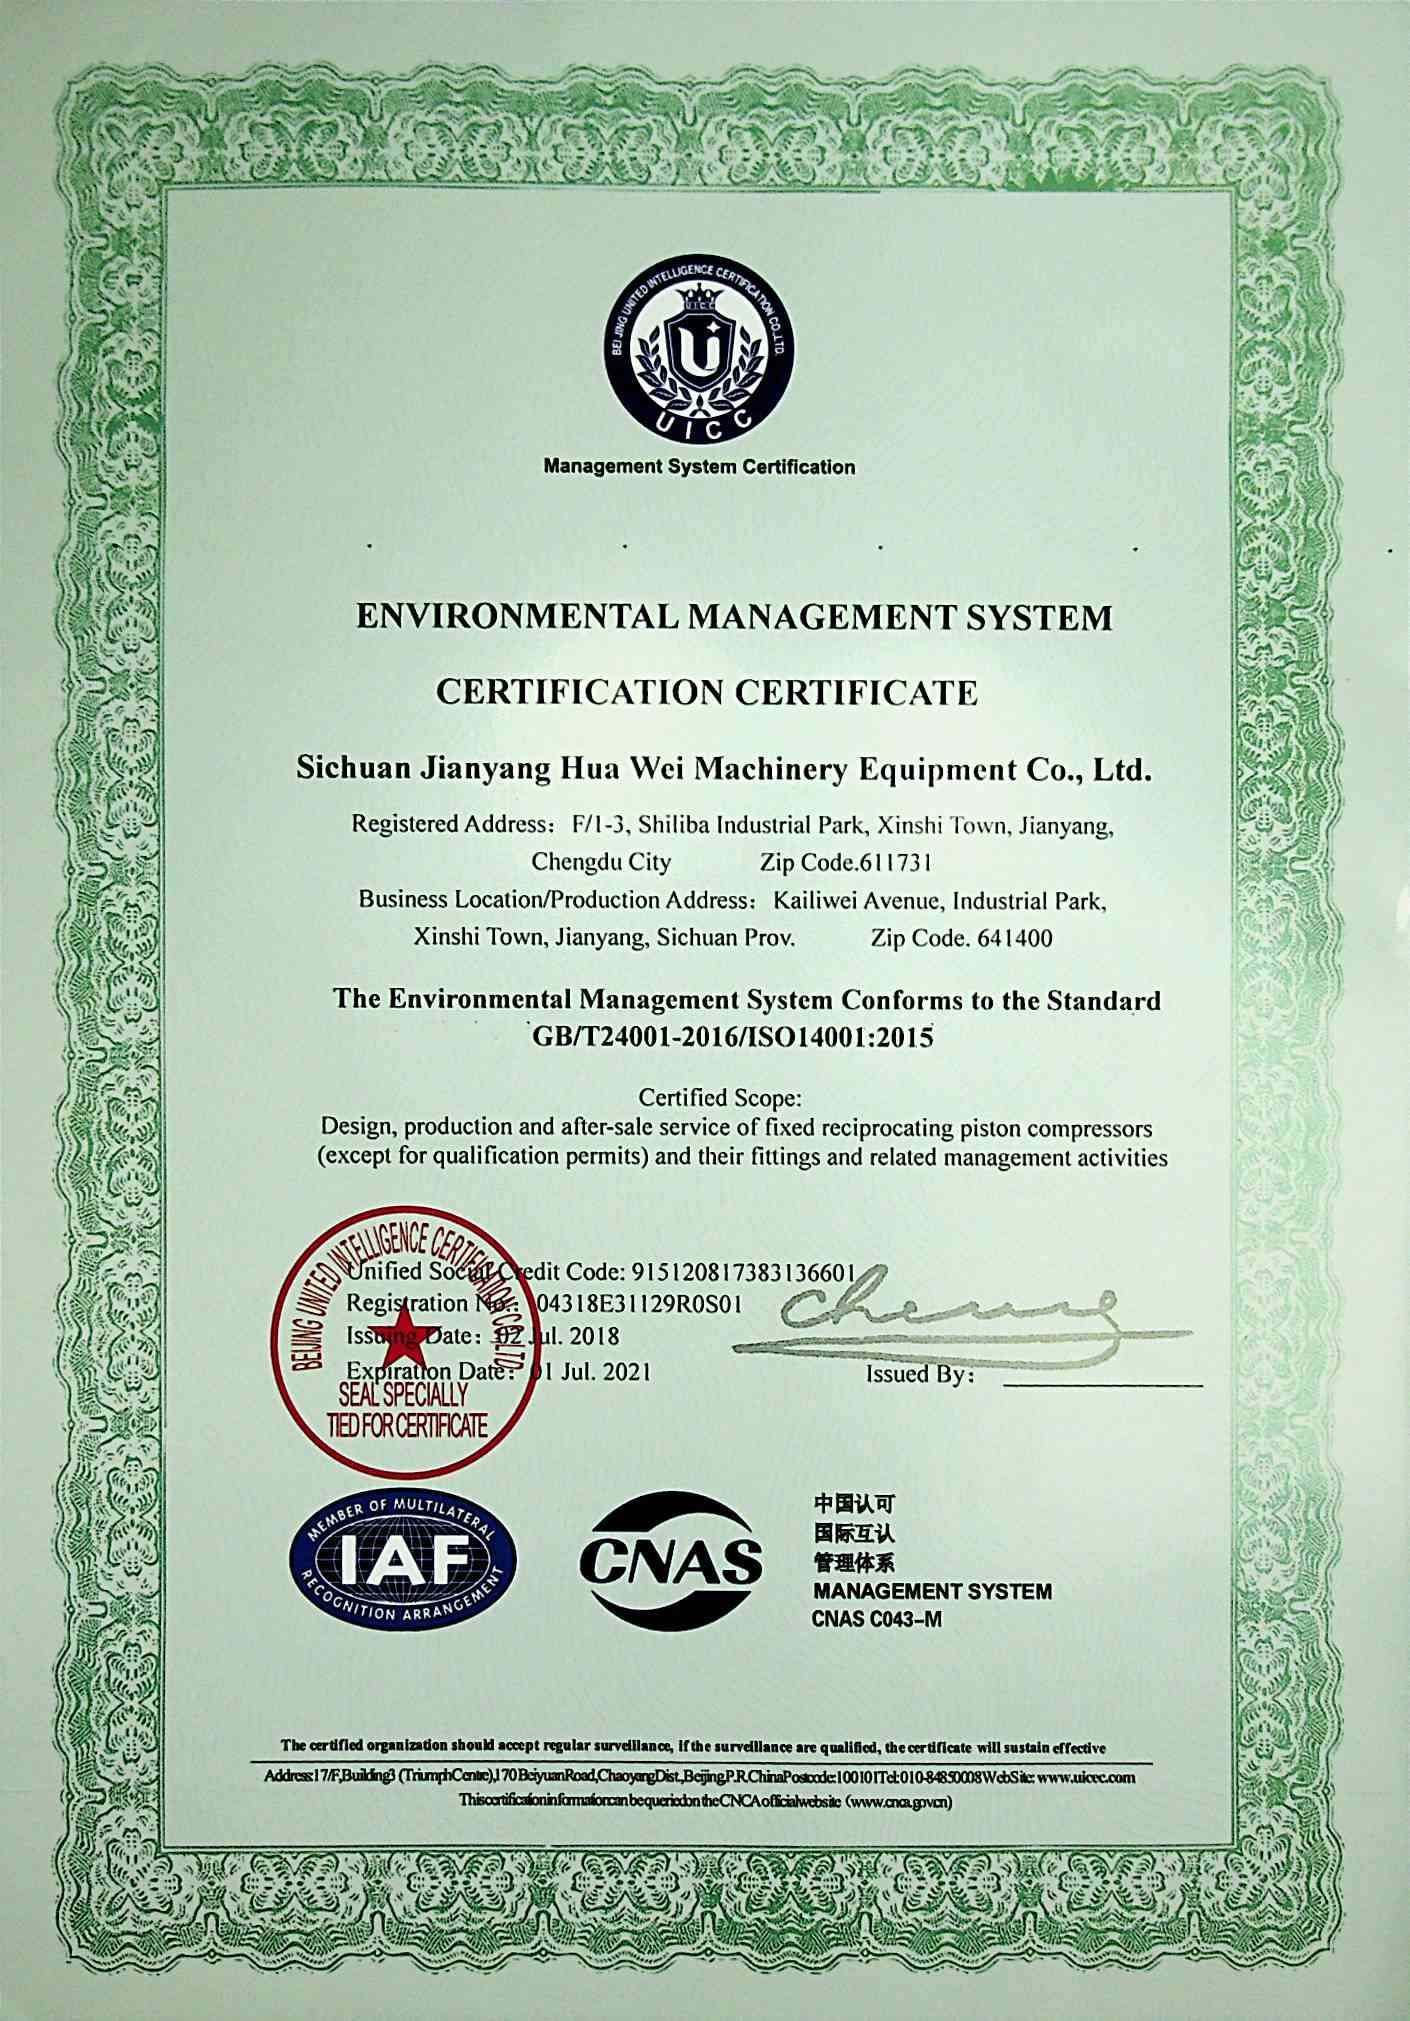 Environmental Management System Certification Certificate-English version